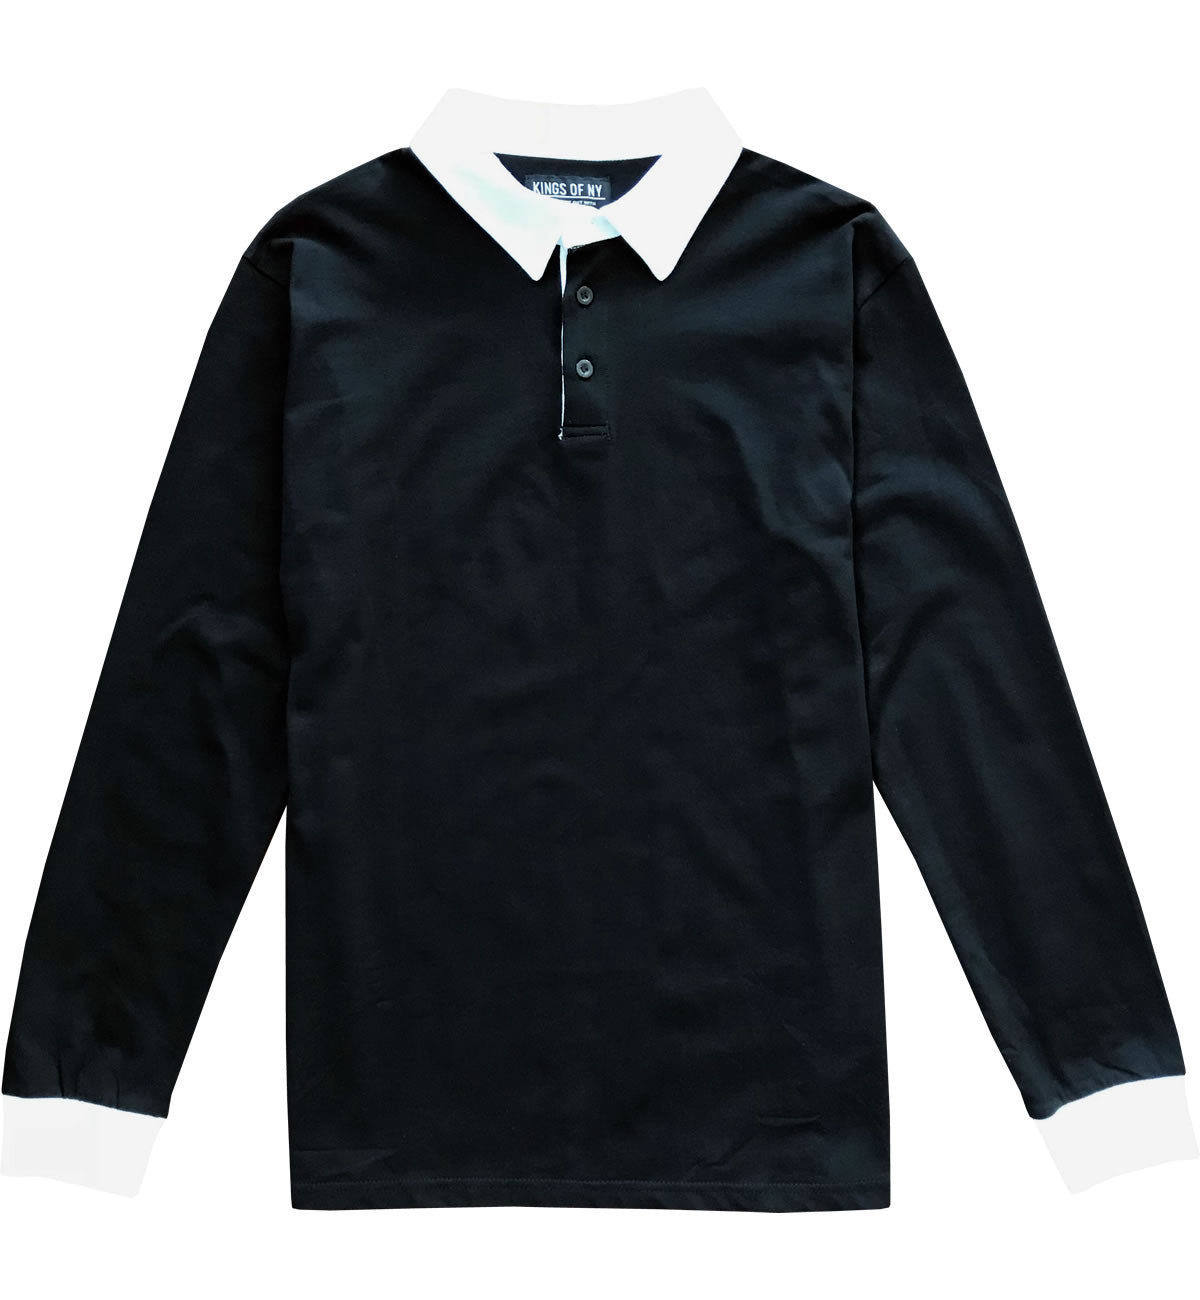 Mens US Basic Black Rugby Shirt Polo White Collar Top Long Sleeve 100% Cotton